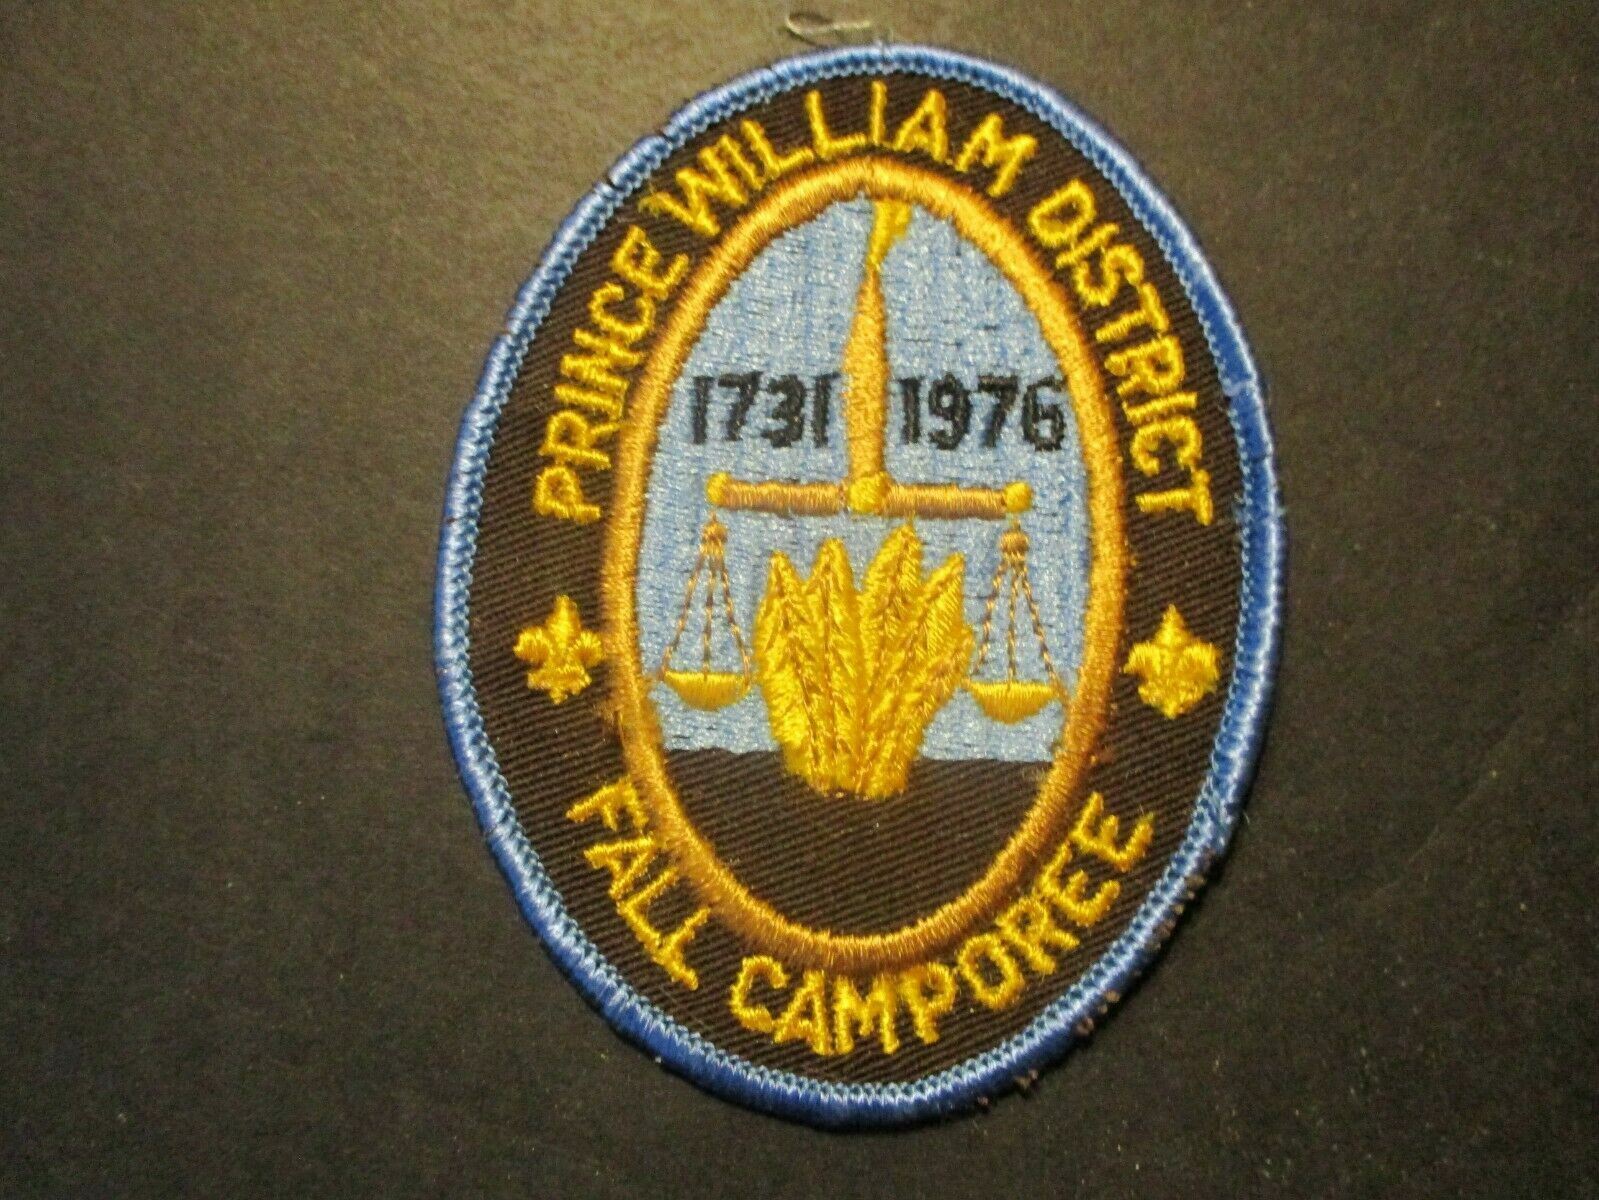 1731-1976 Prince William Fall Camporee black background jacket patch